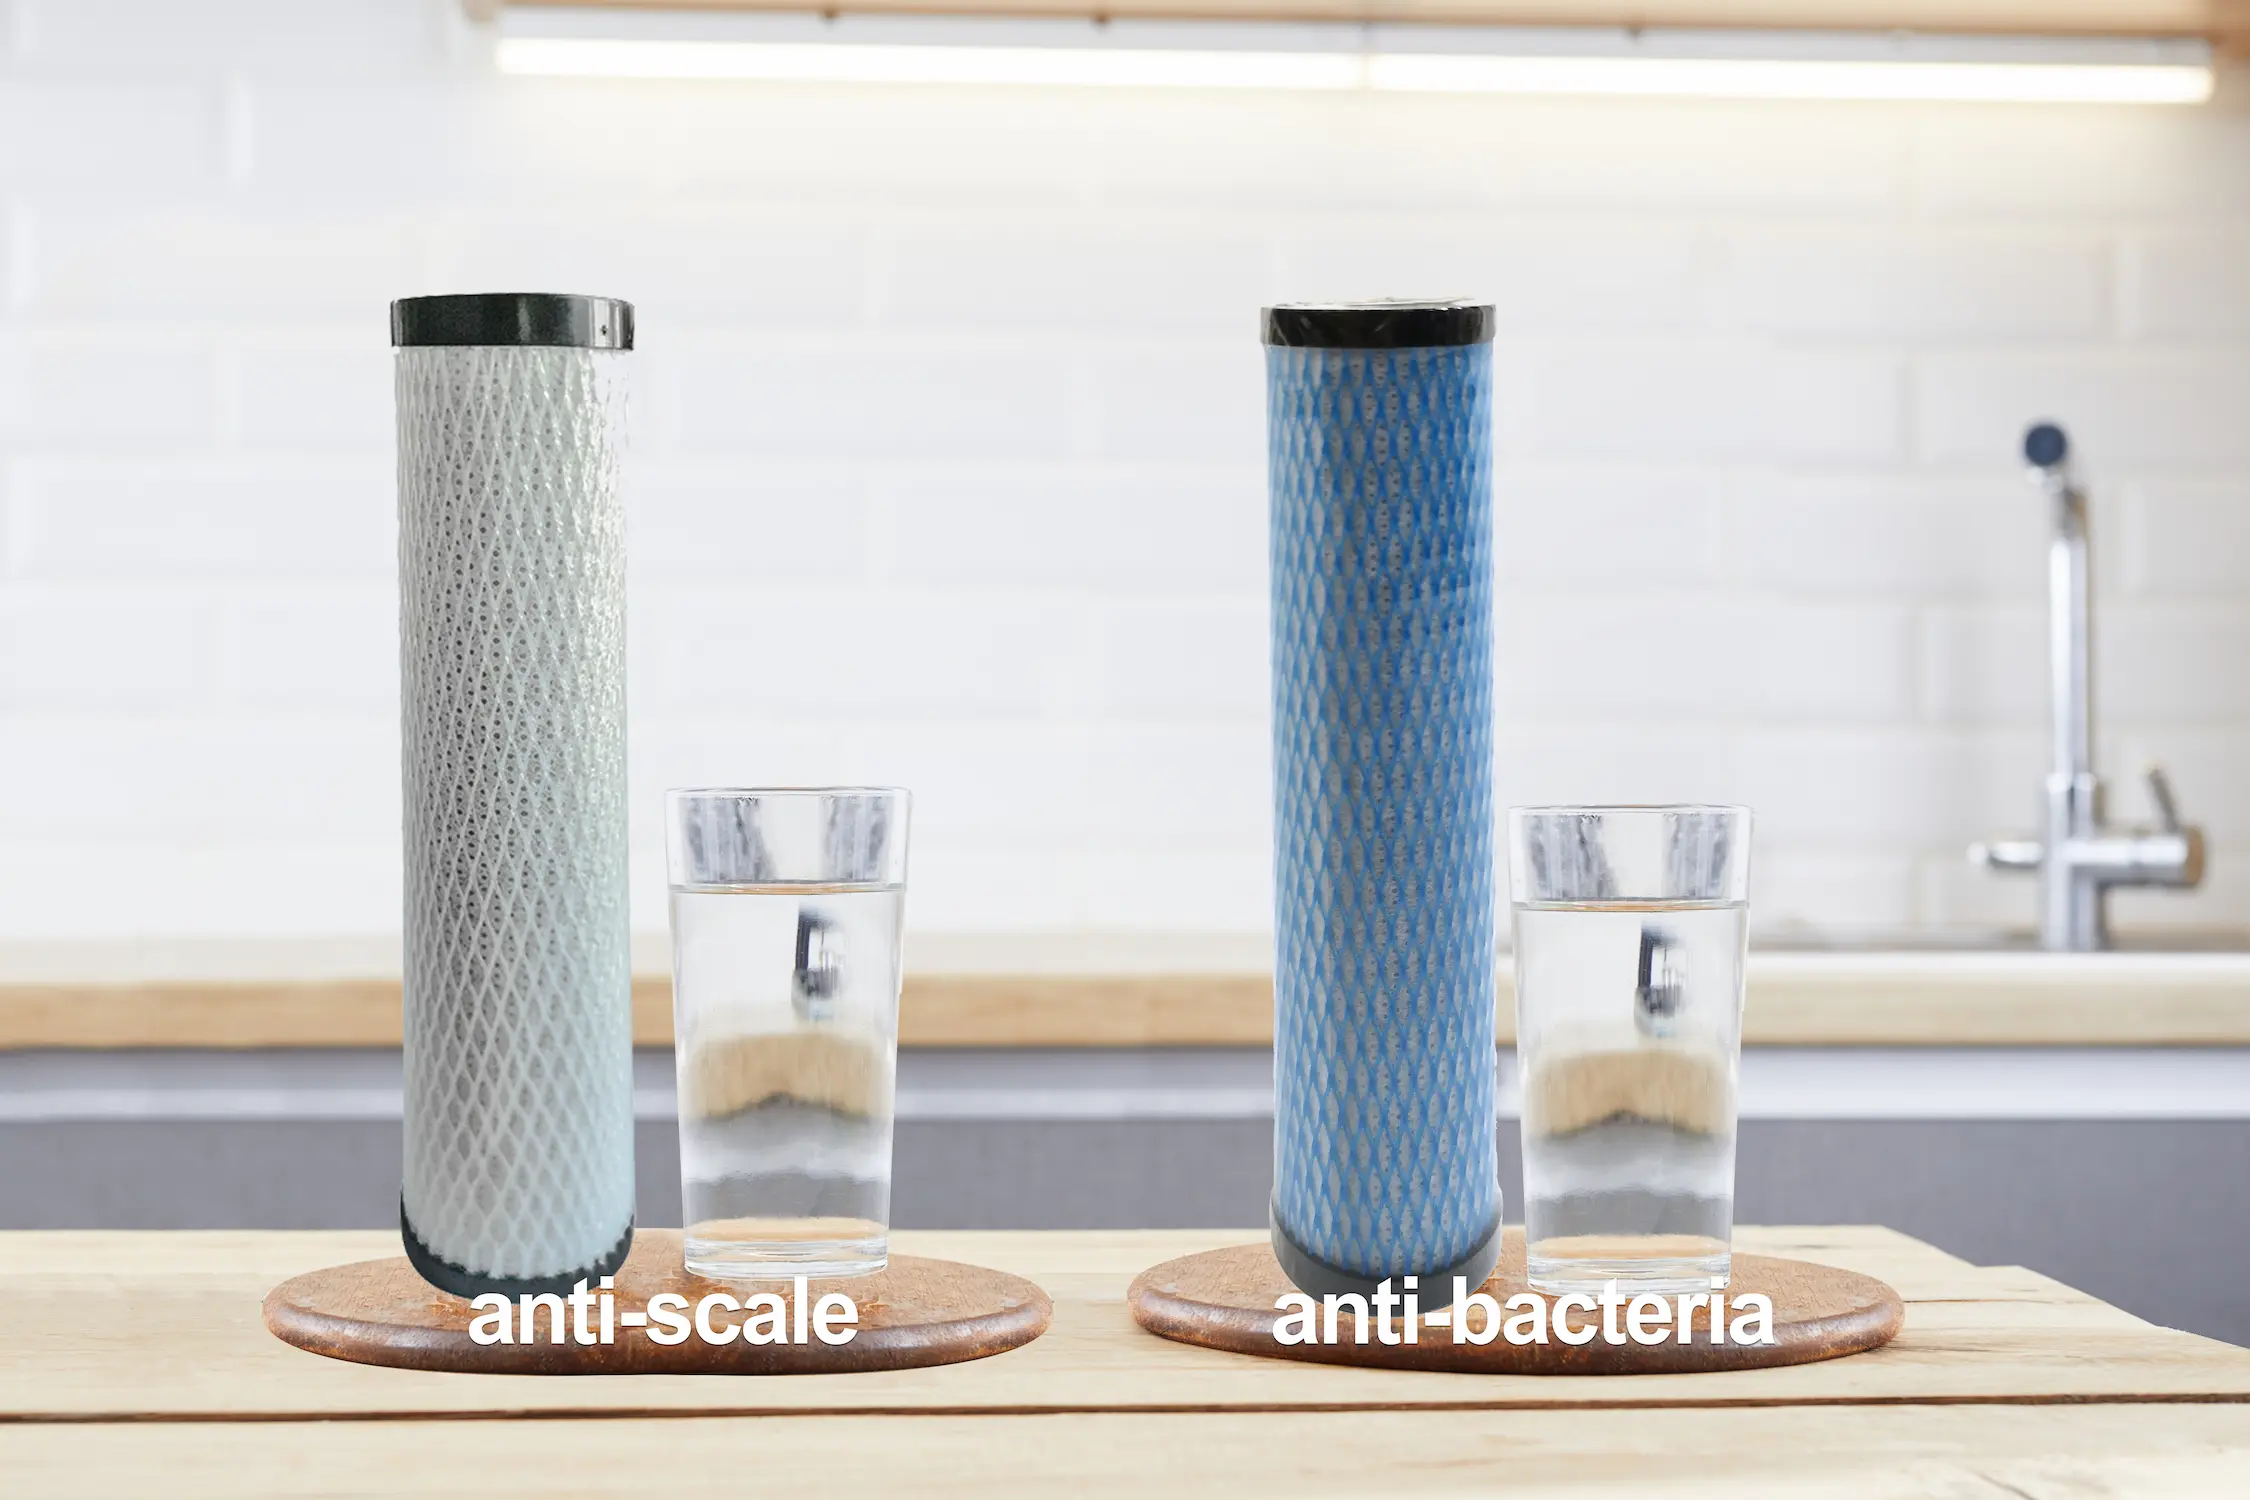 anti-scale and anti-bacteria filter